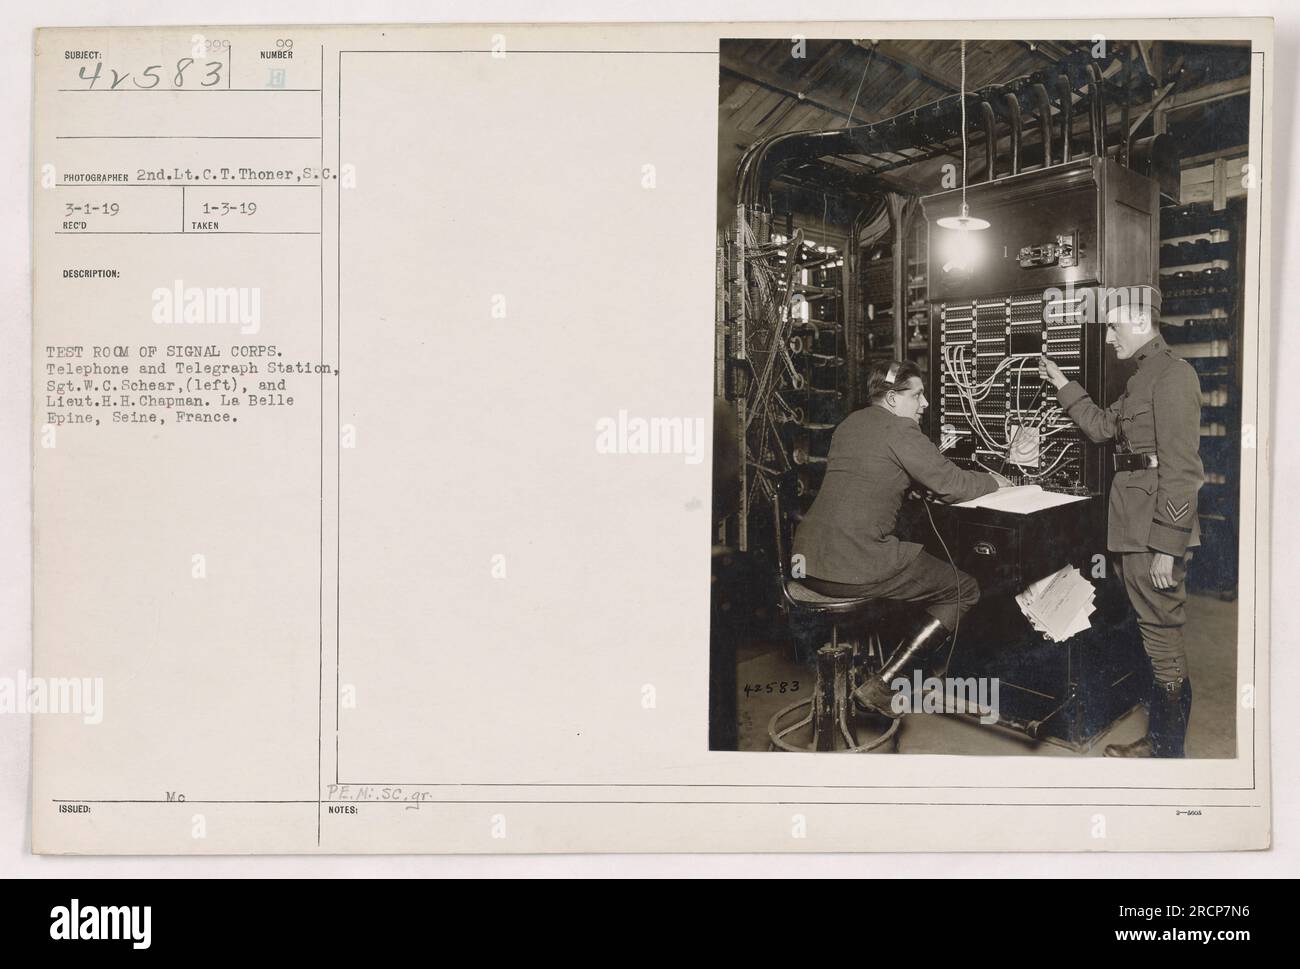 This photograph, taken on March 1, 1919, by 2nd Lt. C.T. Thoner, shows a test room of the Signal Corps Telephone and Telegraph Station at Le Belle Epine, Seine, France. It features Sgt. W.C. Sehear on the left and Lt. H.H. Chapman. Stock Photo